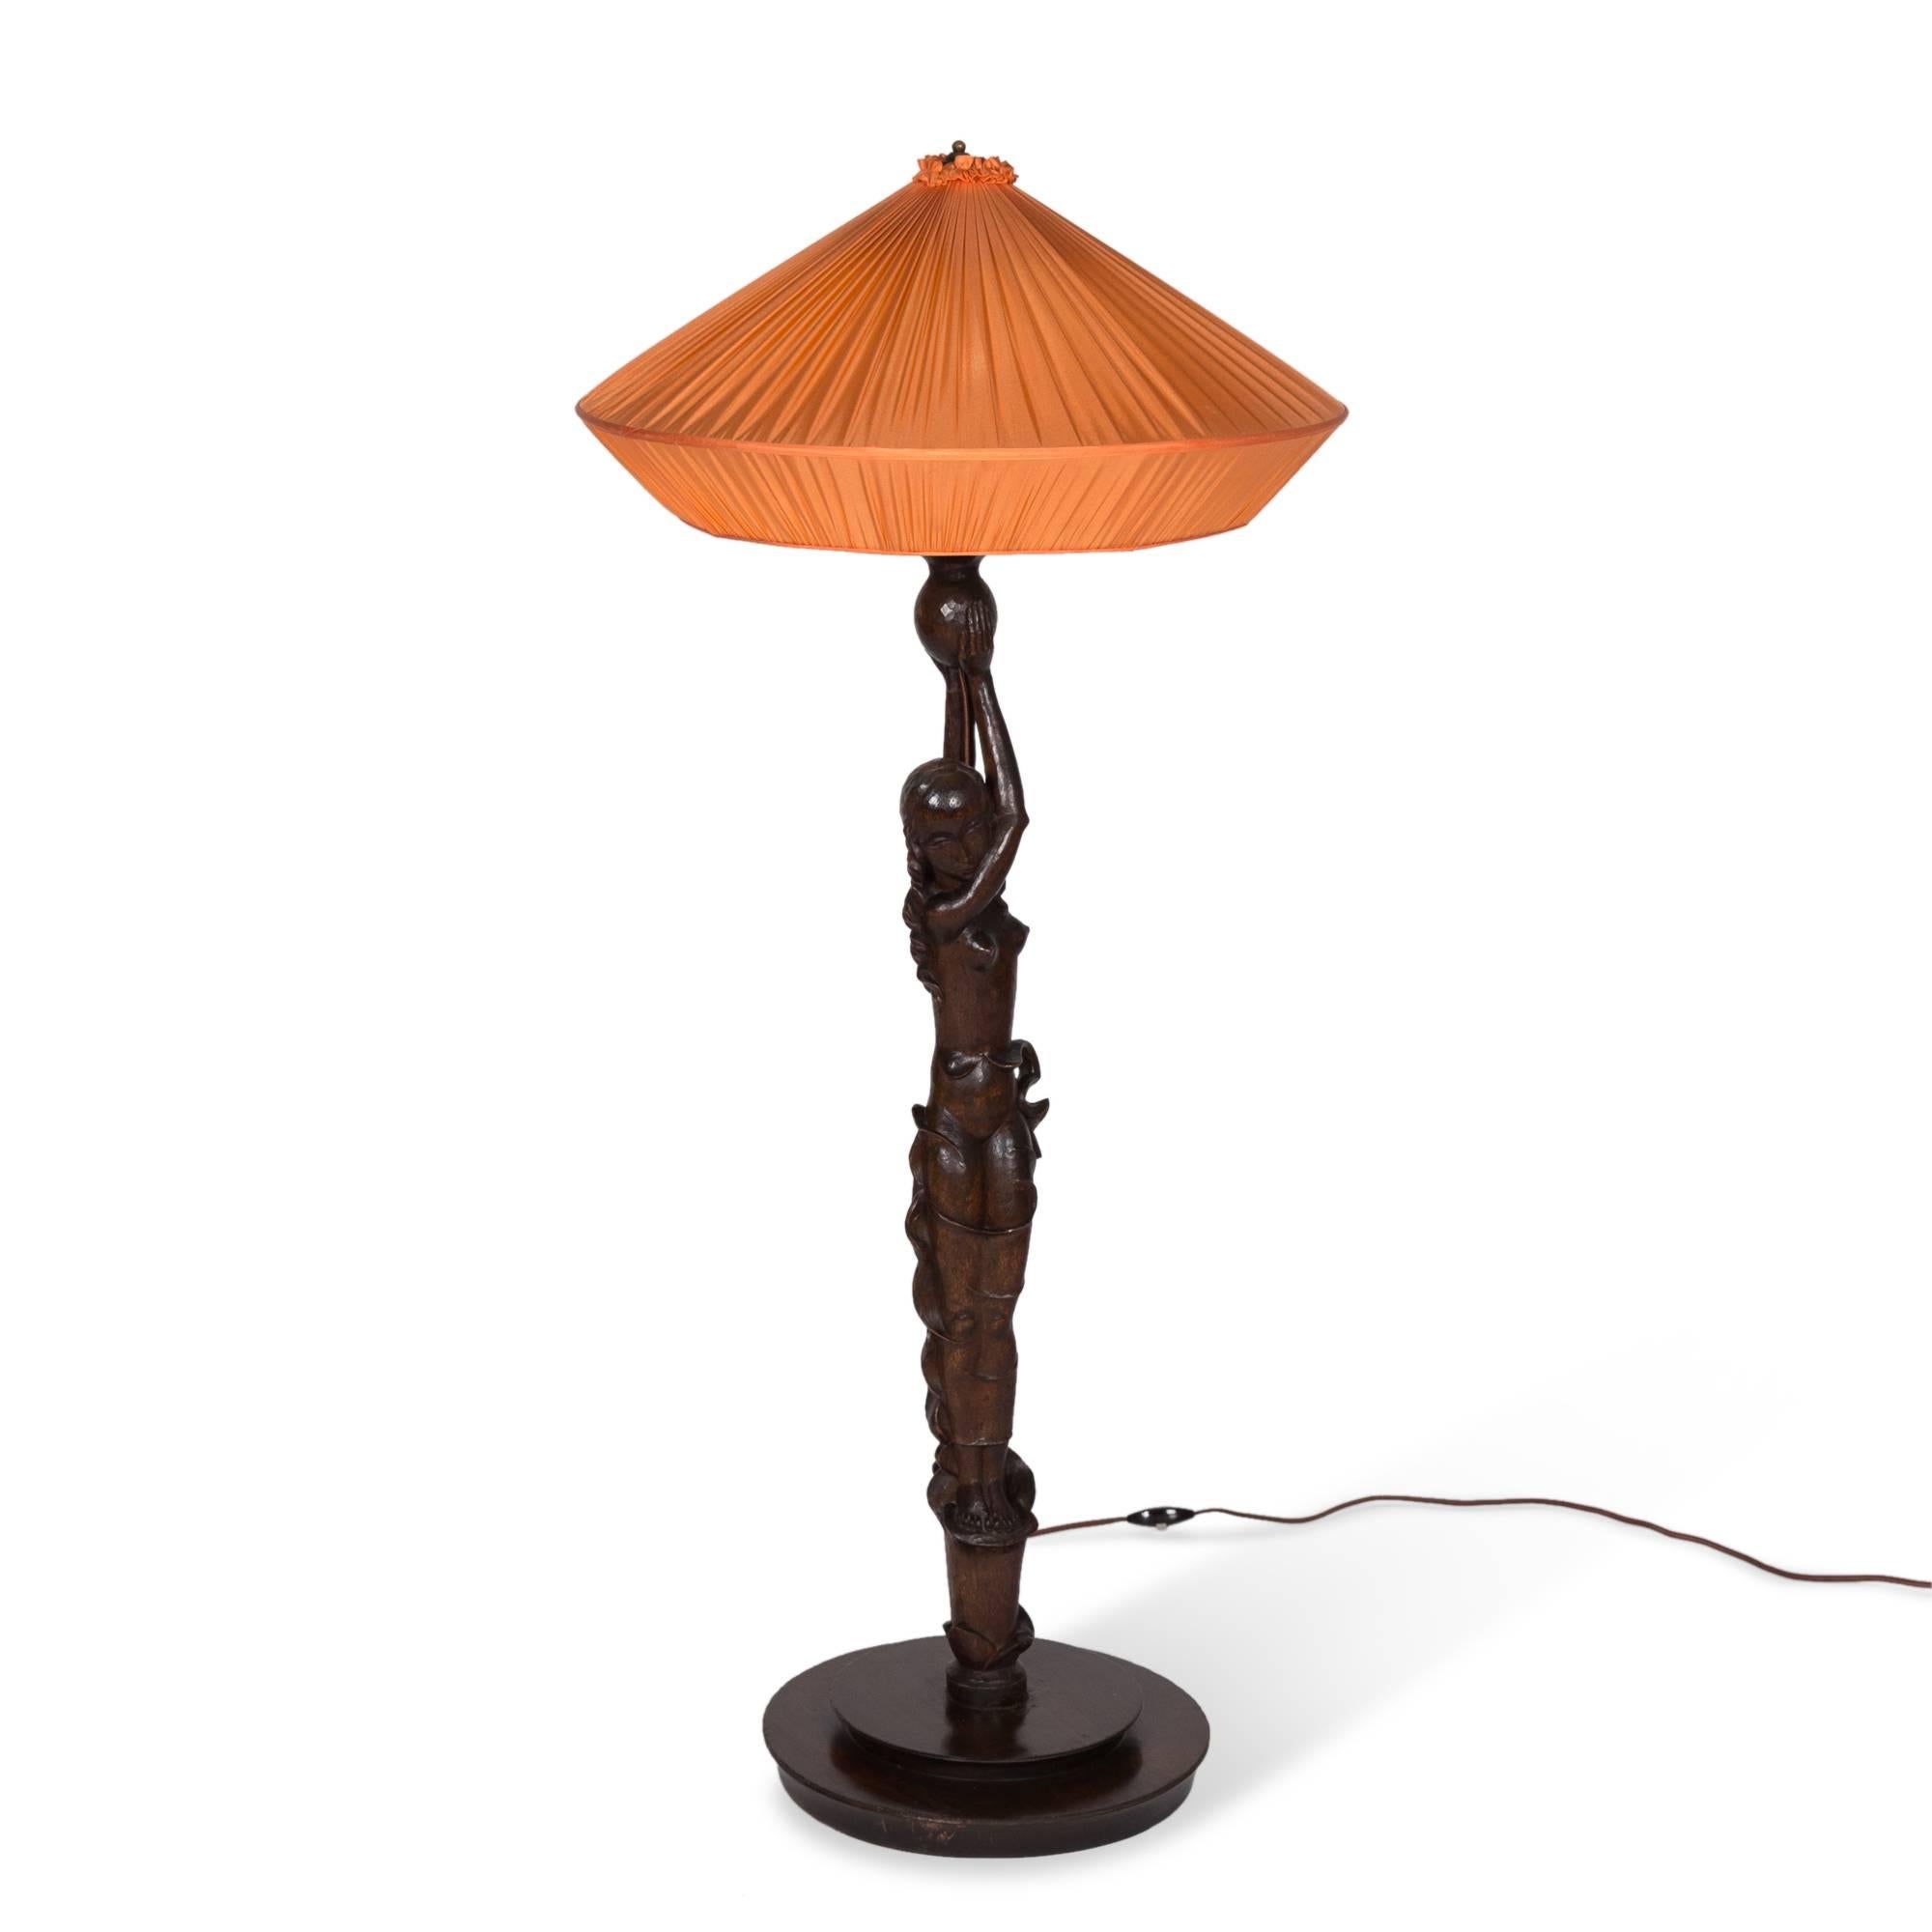 Carved Wood Figural Tall Table or Floor Lamp, German, circa 1920 For Sale 1